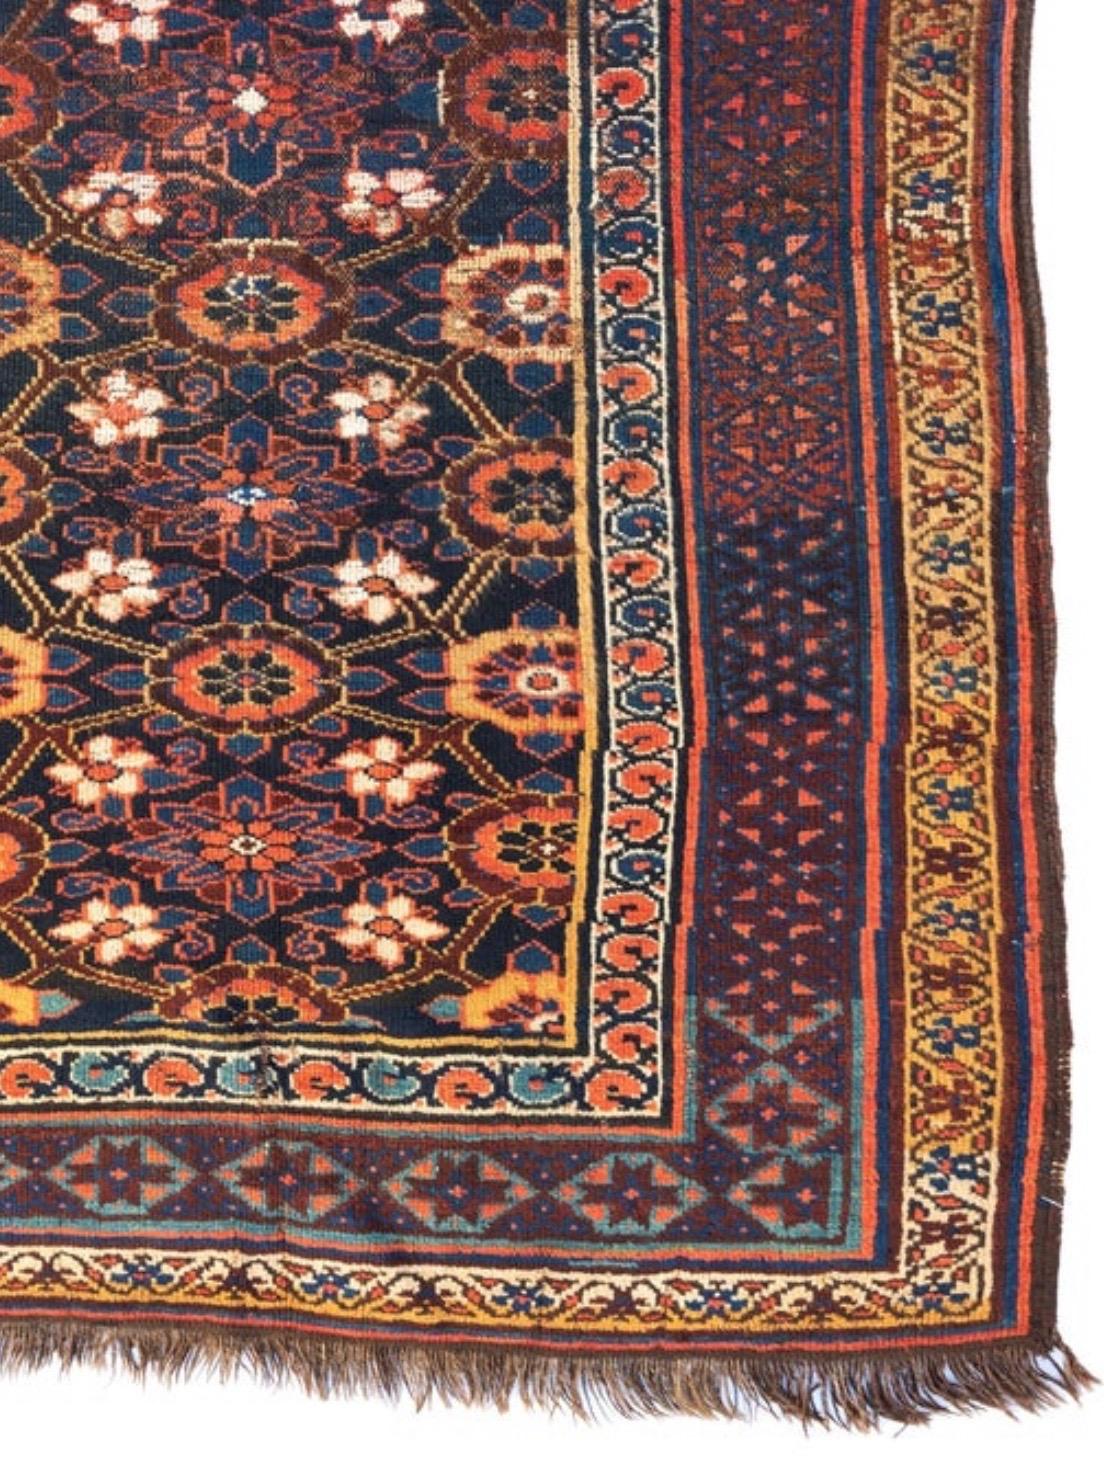 Hand-Woven Antique Caucasian Burgundy Navy Blue and Gold Karabagh Rug, circa 1880-1900 For Sale